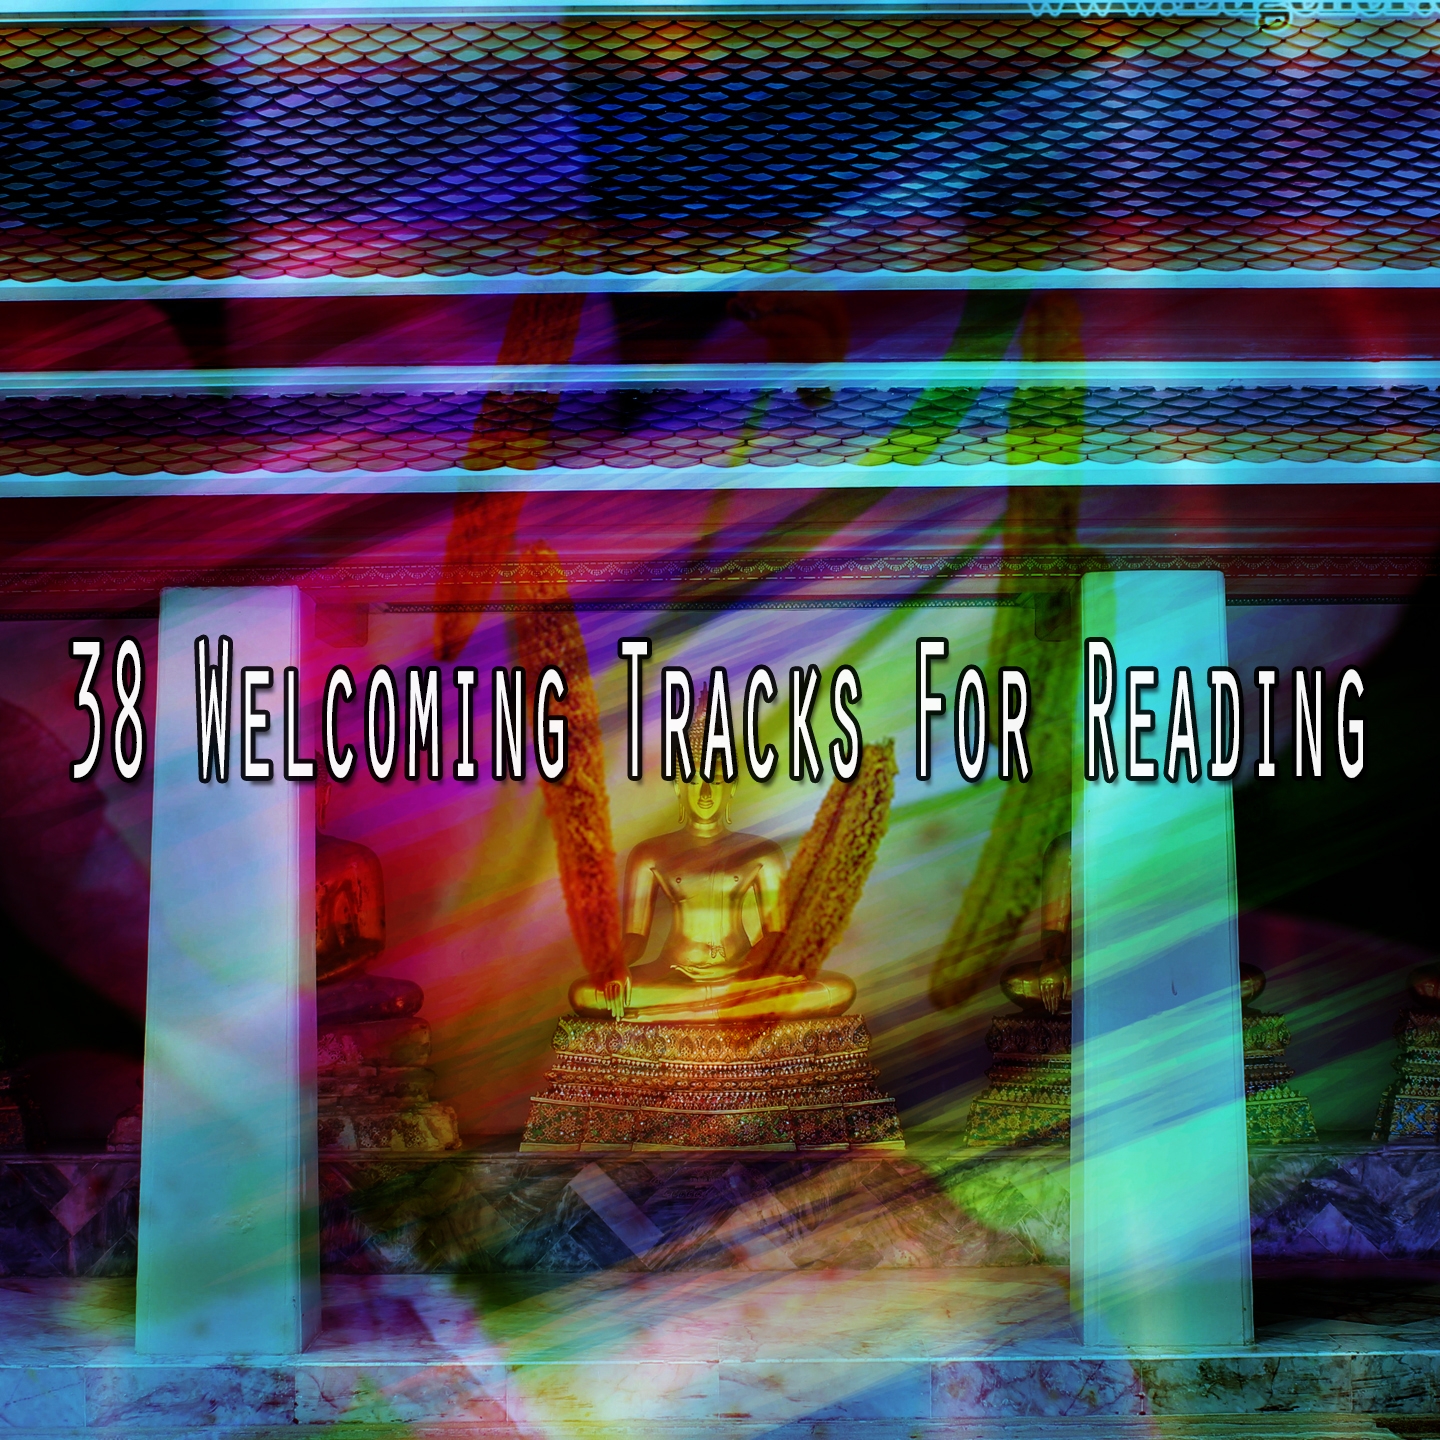 38 Welcoming Tracks For Reading